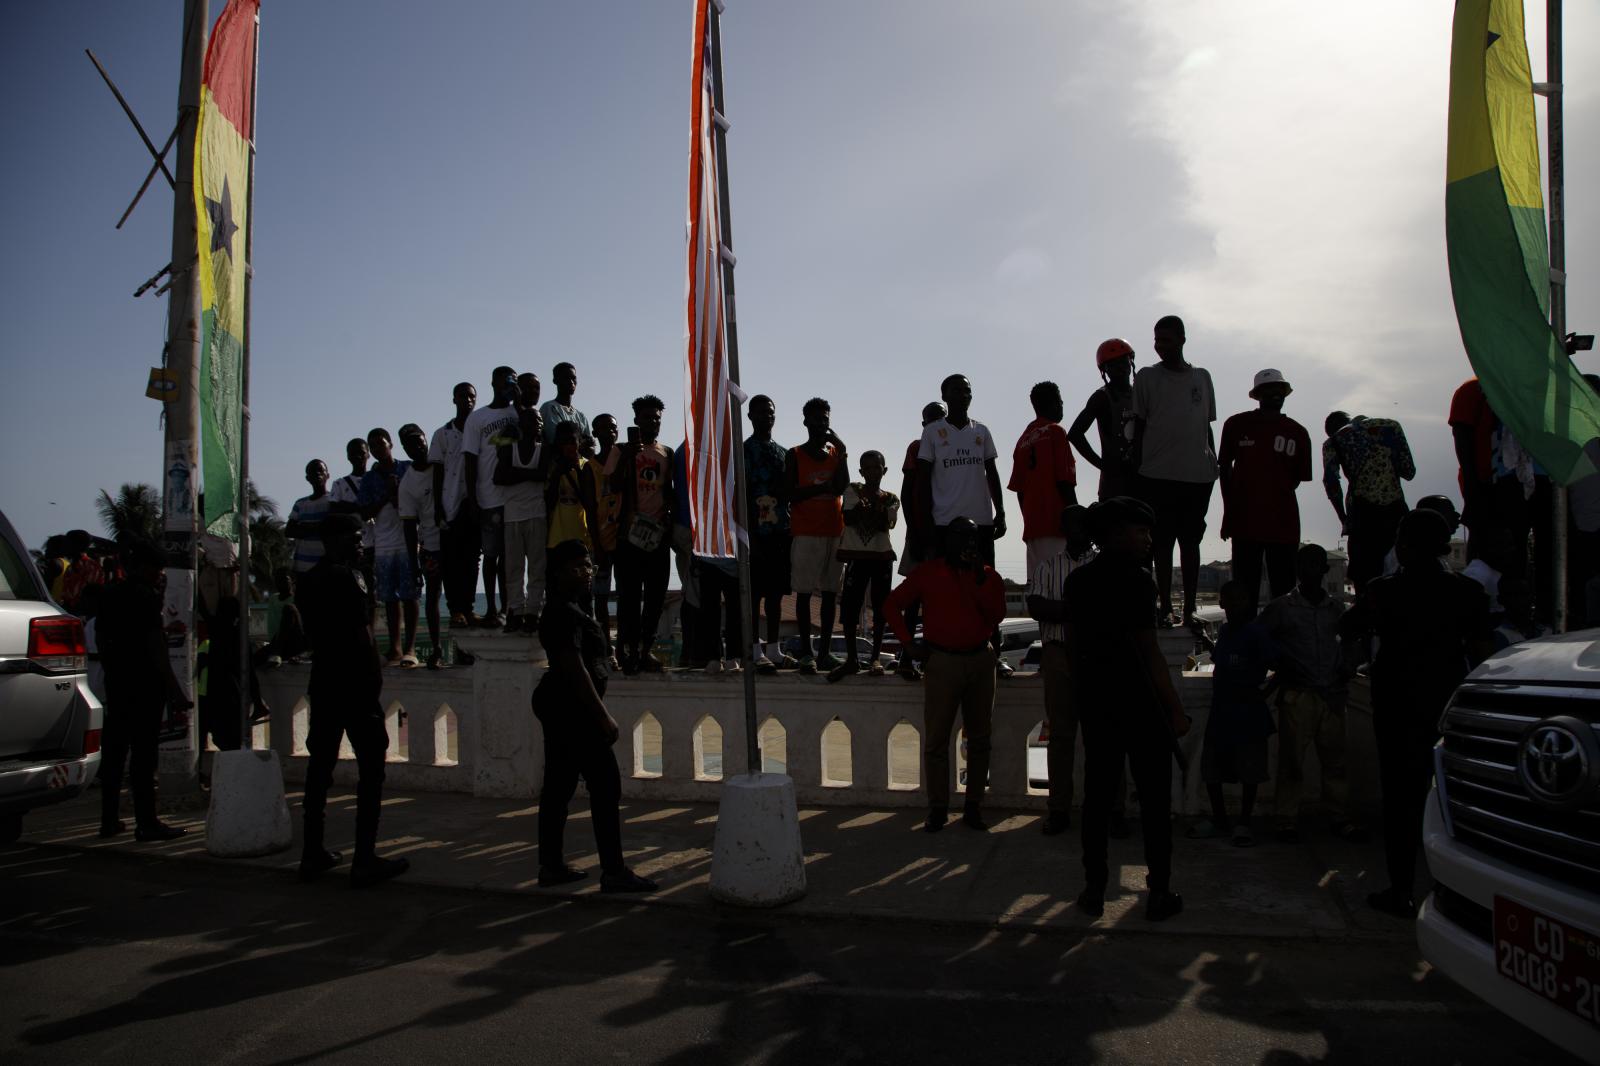 Image from U.S. Vice President Kamala Harris Visit To Ghana - Onlookers stand in a queue to catch a glimpse of U.S....